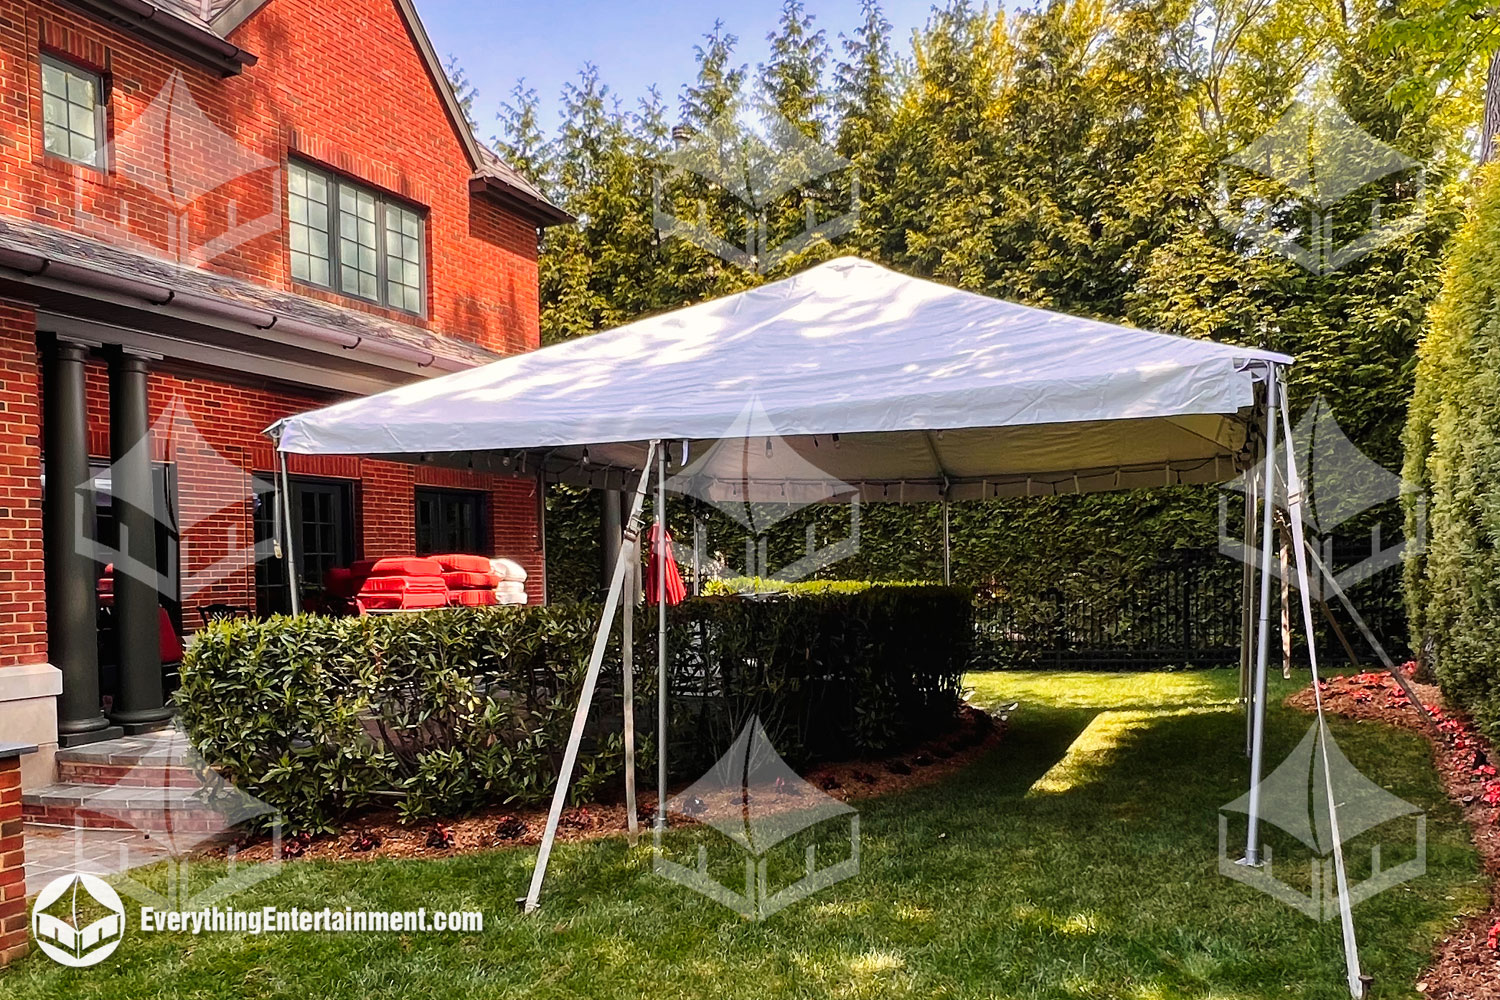 20x20 white top frame tent set up in backyard with greenery.